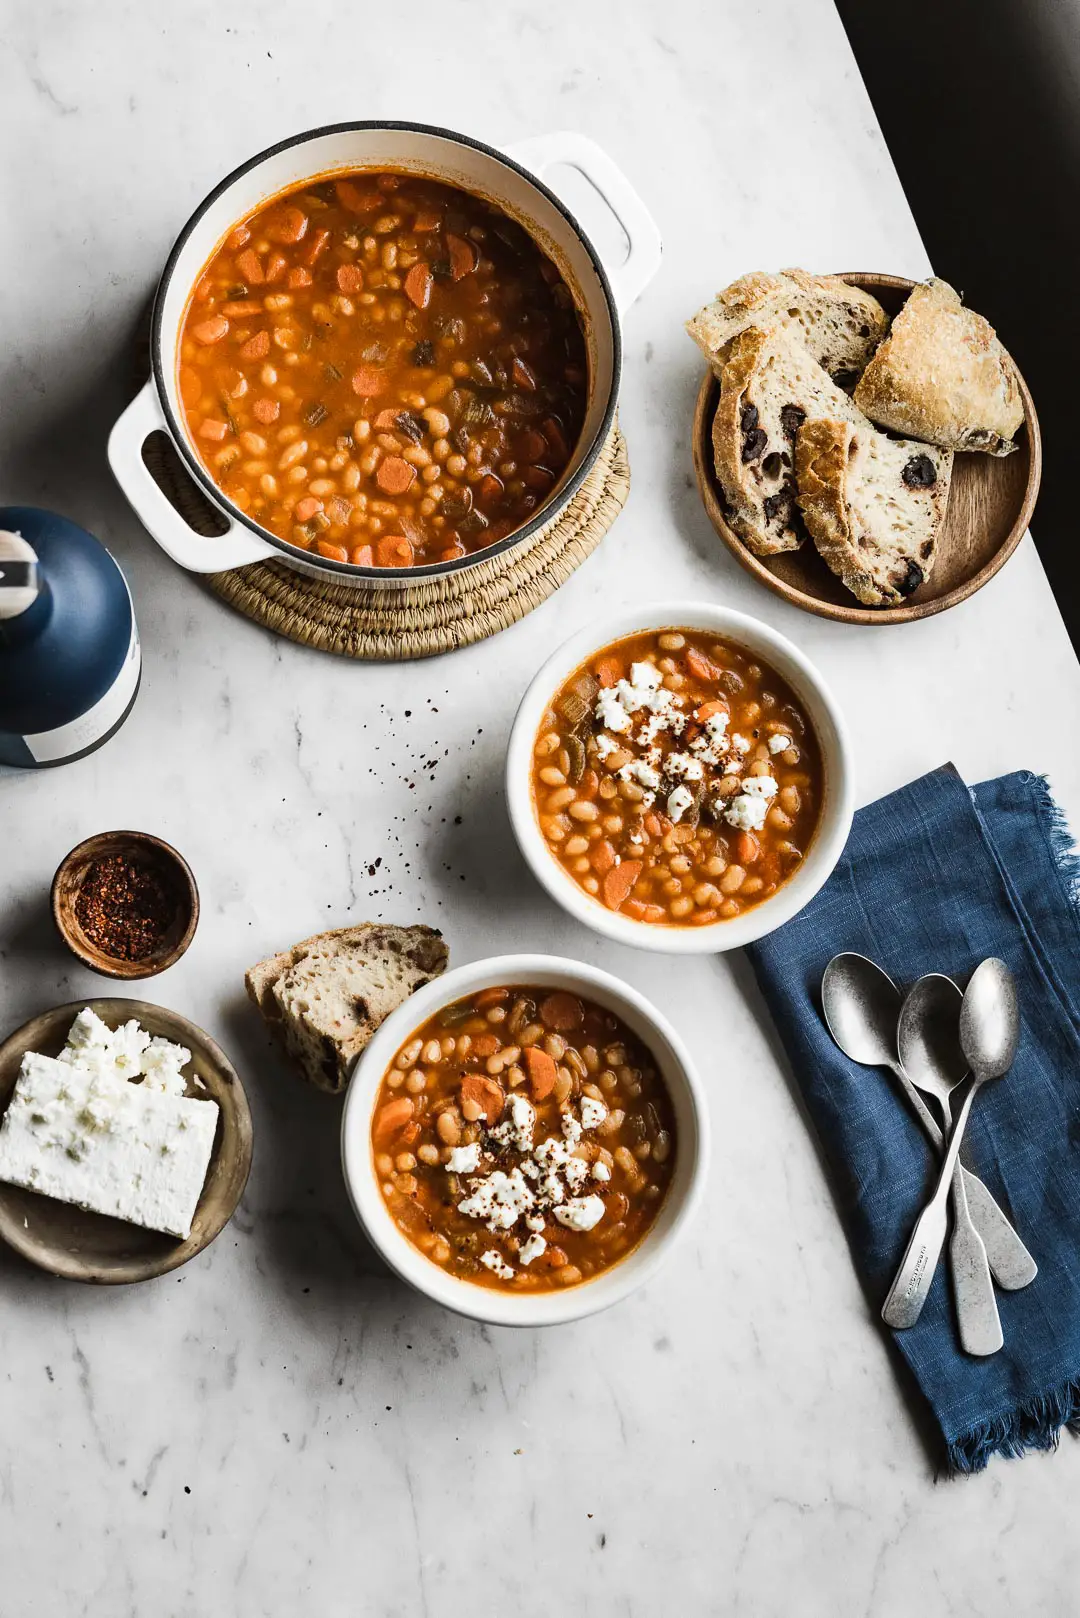 One of the most beloved Greek recipes, Fasolada - Greek White Bean Soup is a simple, nourishing comfort food that pairs beautifully with a bit of crumbled feta, olives, and crusty bread. 